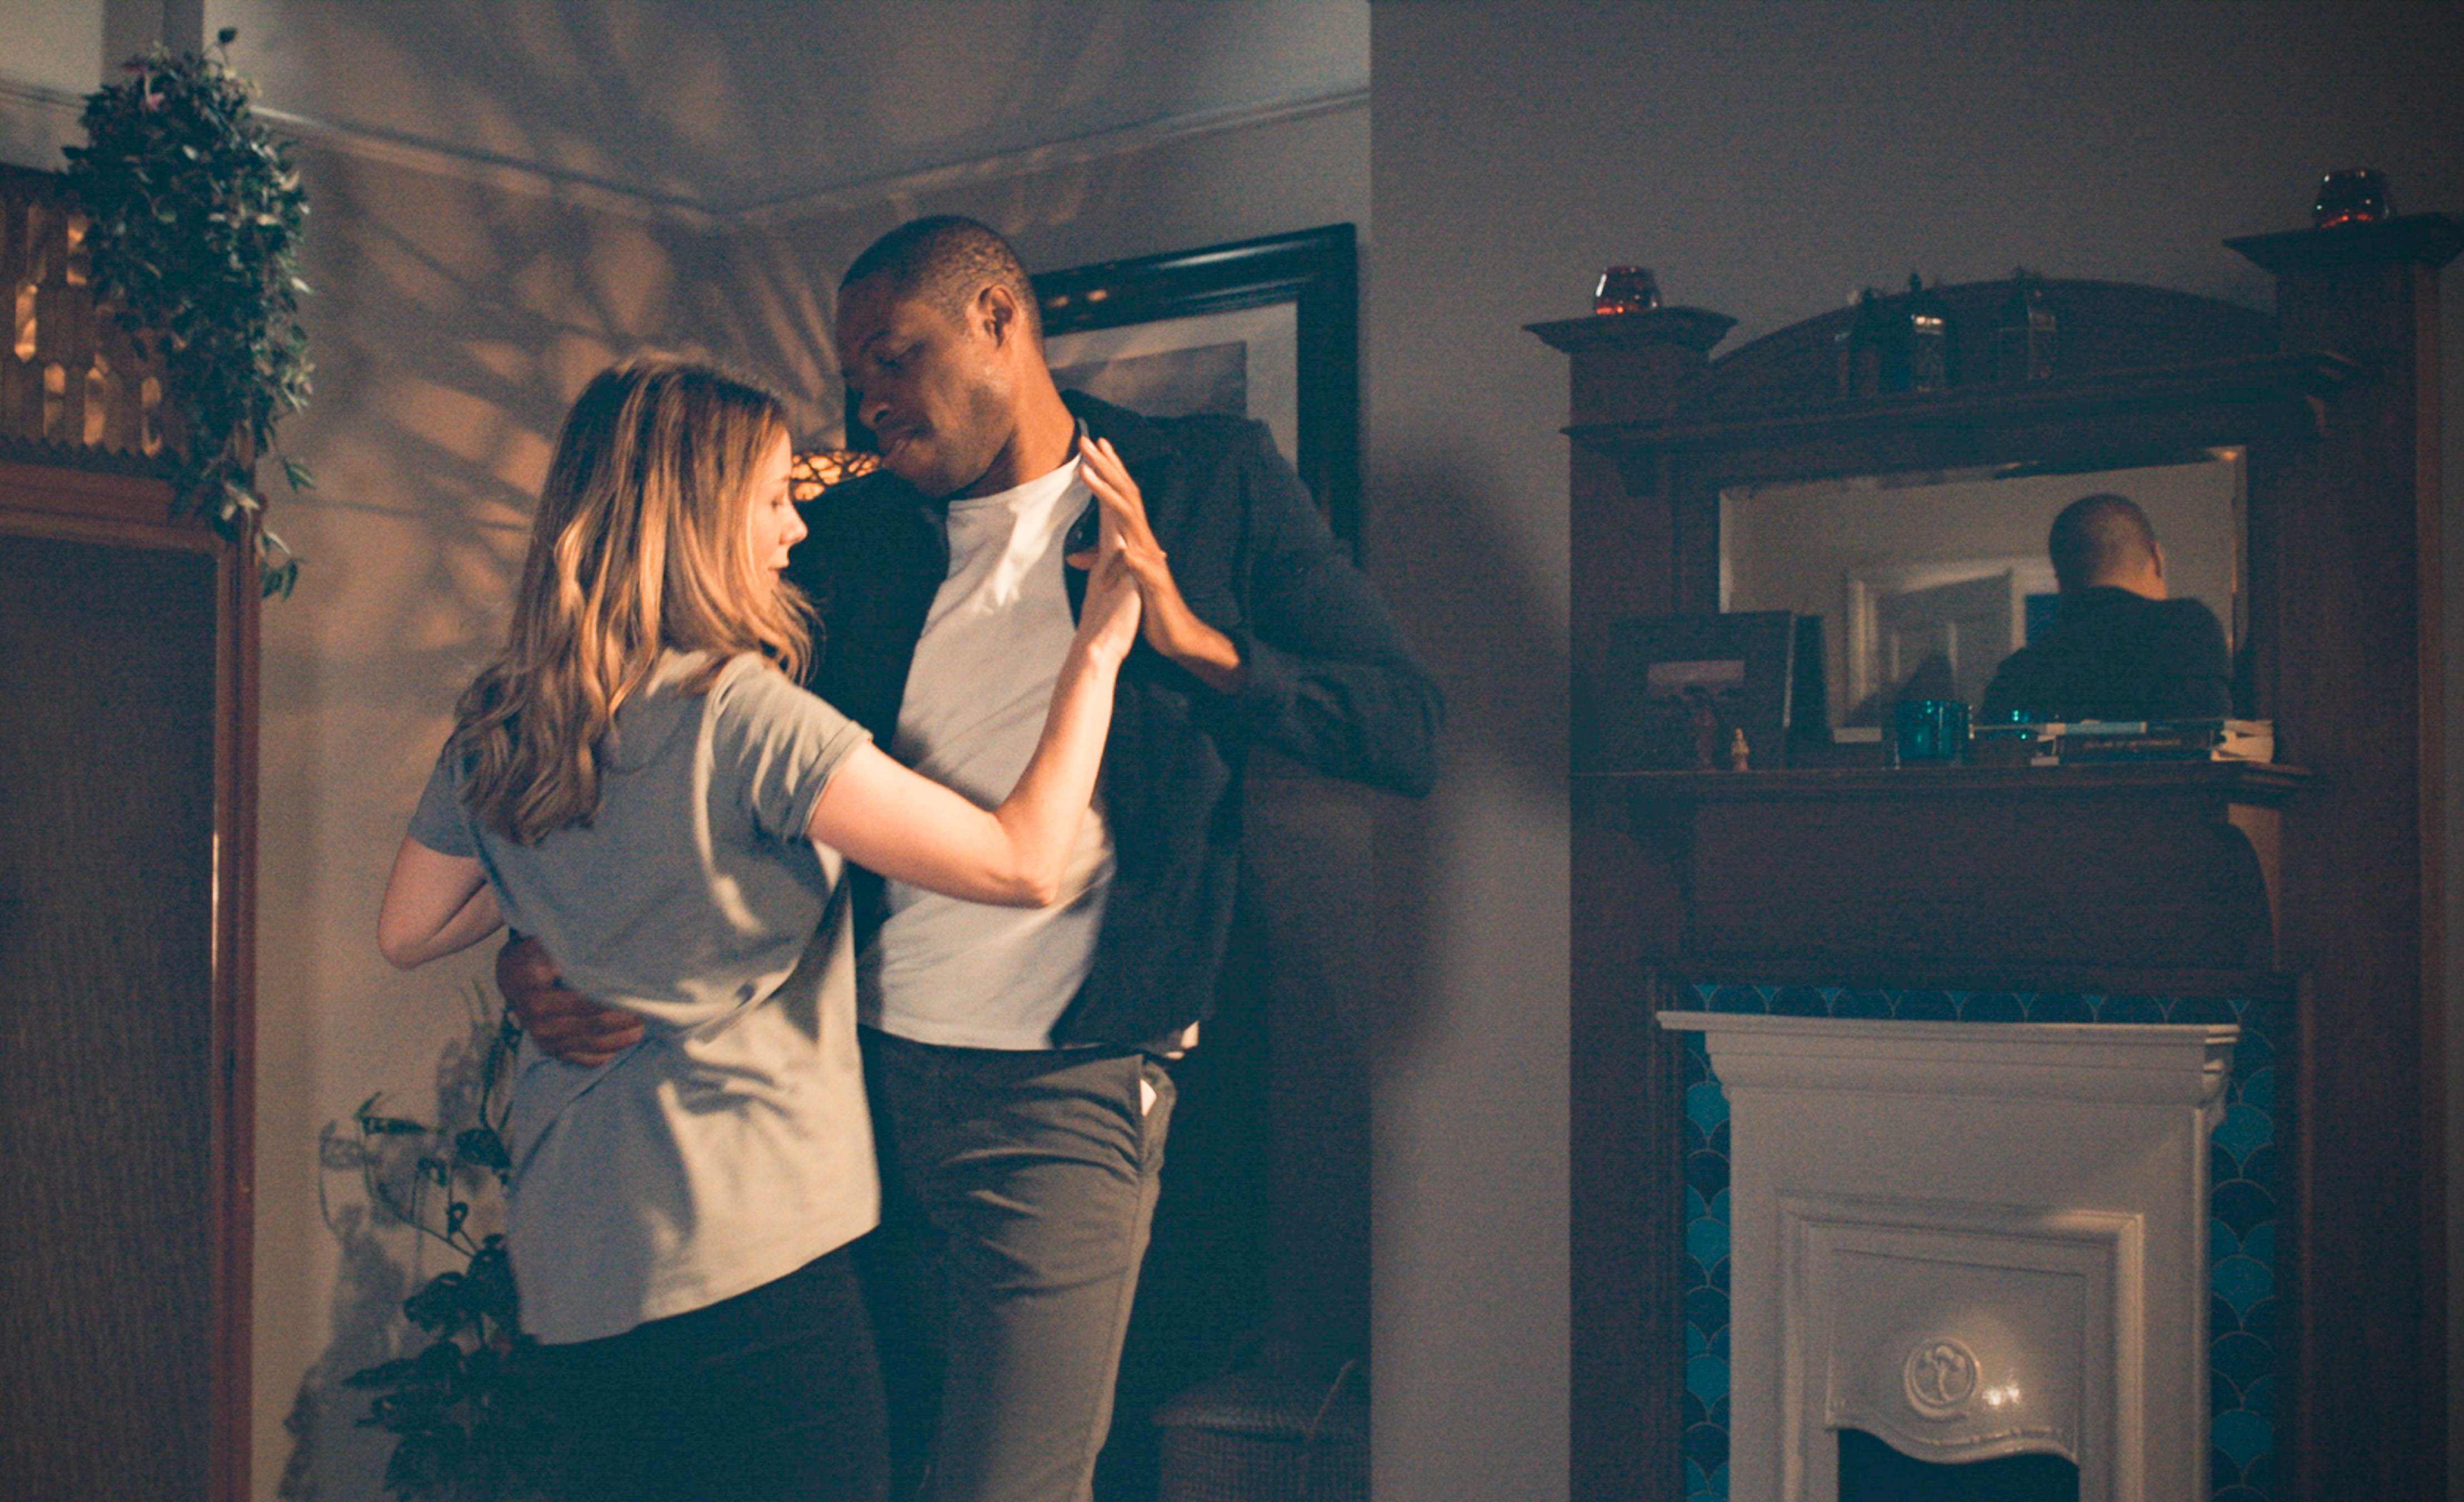 Stevie and Matthew drunkenly dance together in 'Casualty'.